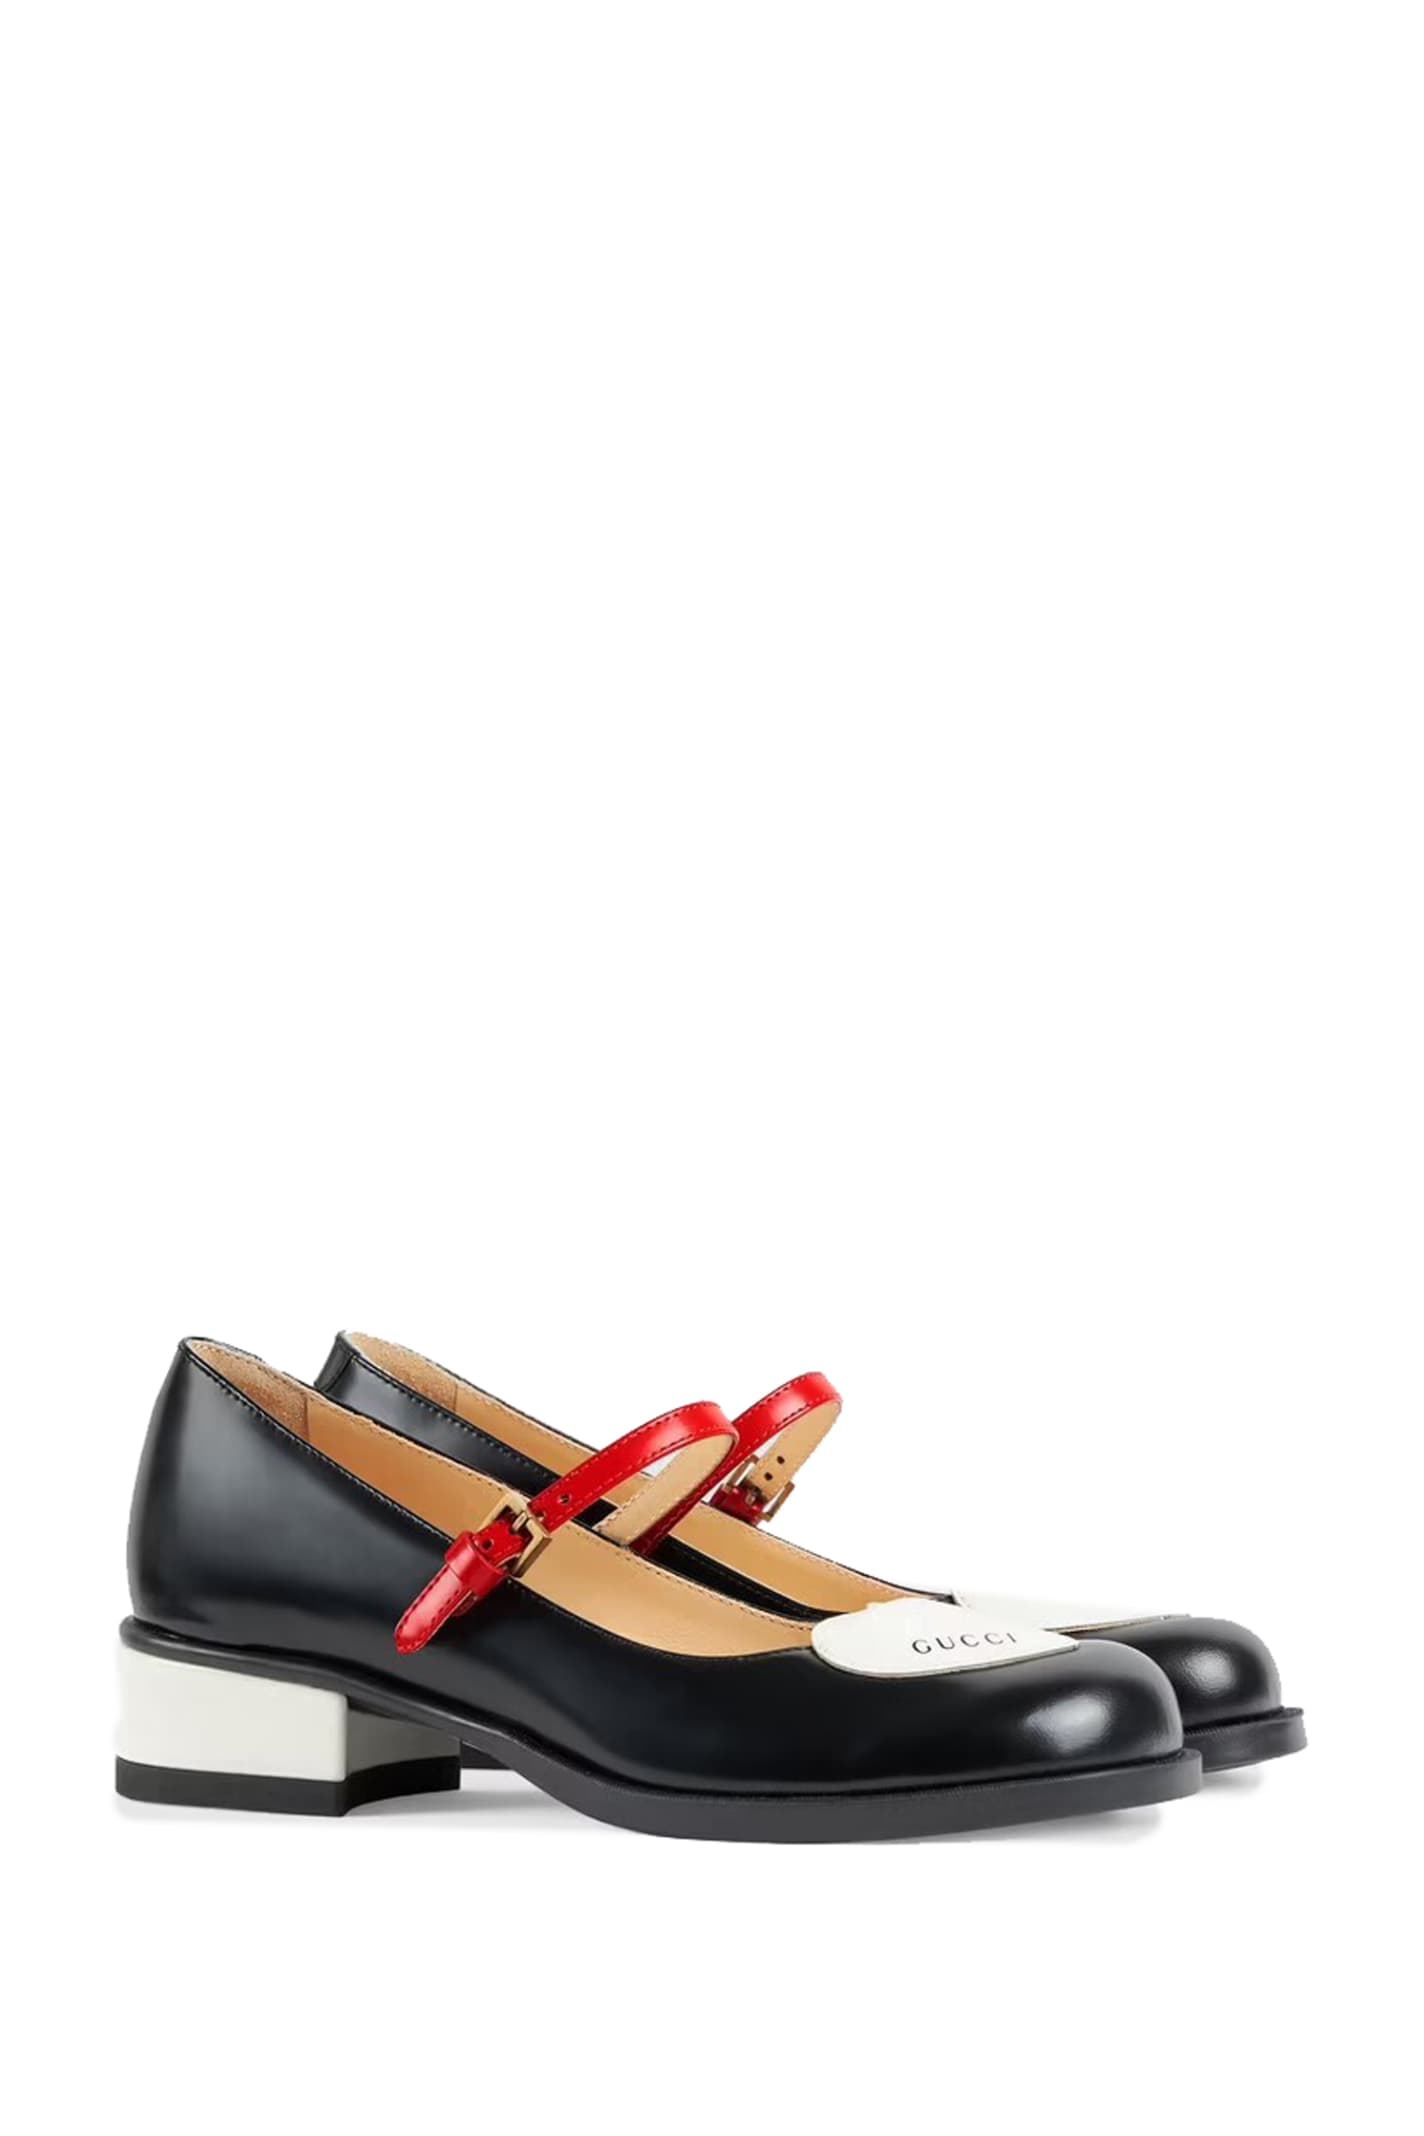 Shop Gucci Leather Ballet Flats In Back